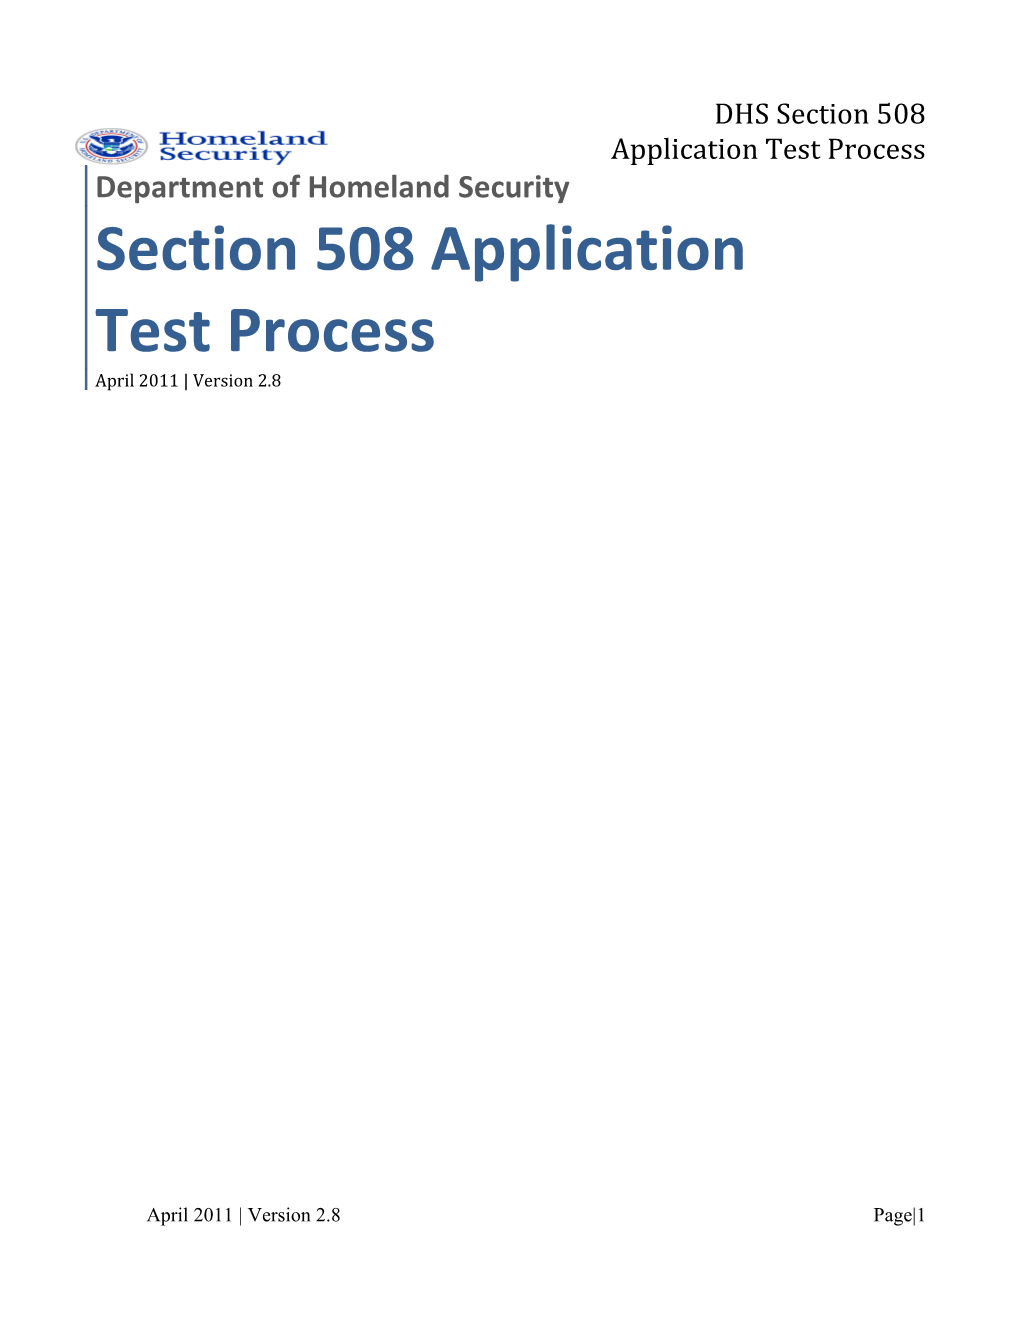 Section 508 Application Test Process